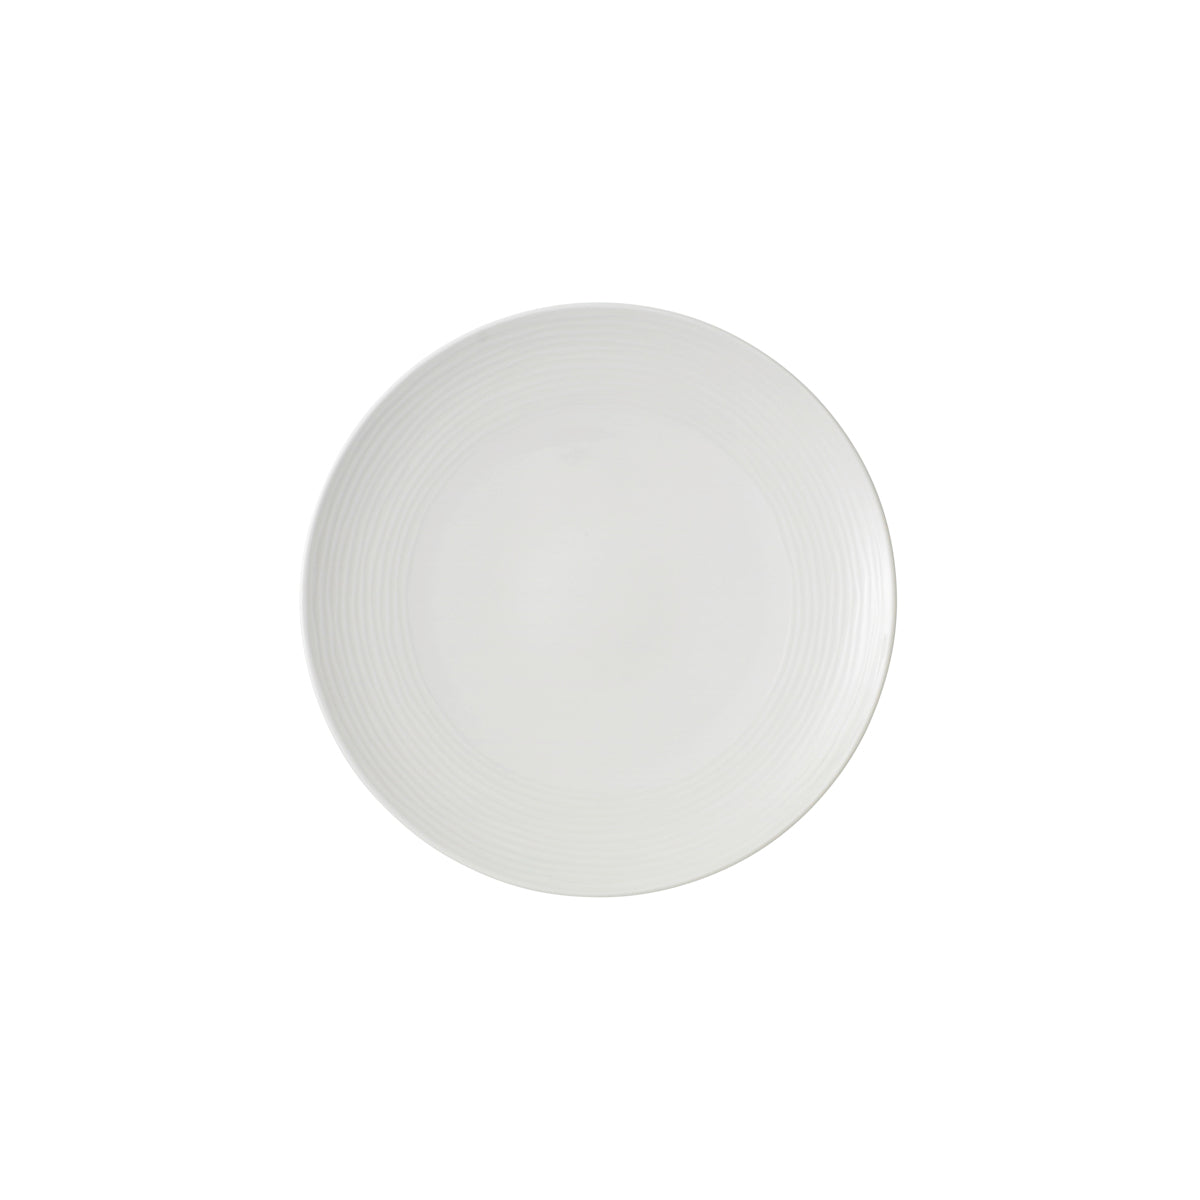 VB16-3356-2621 Villeroy And Boch Villeroy And Boch Sedona White Coupe Plate 290mm Tomkin Australia Hospitality Supplies